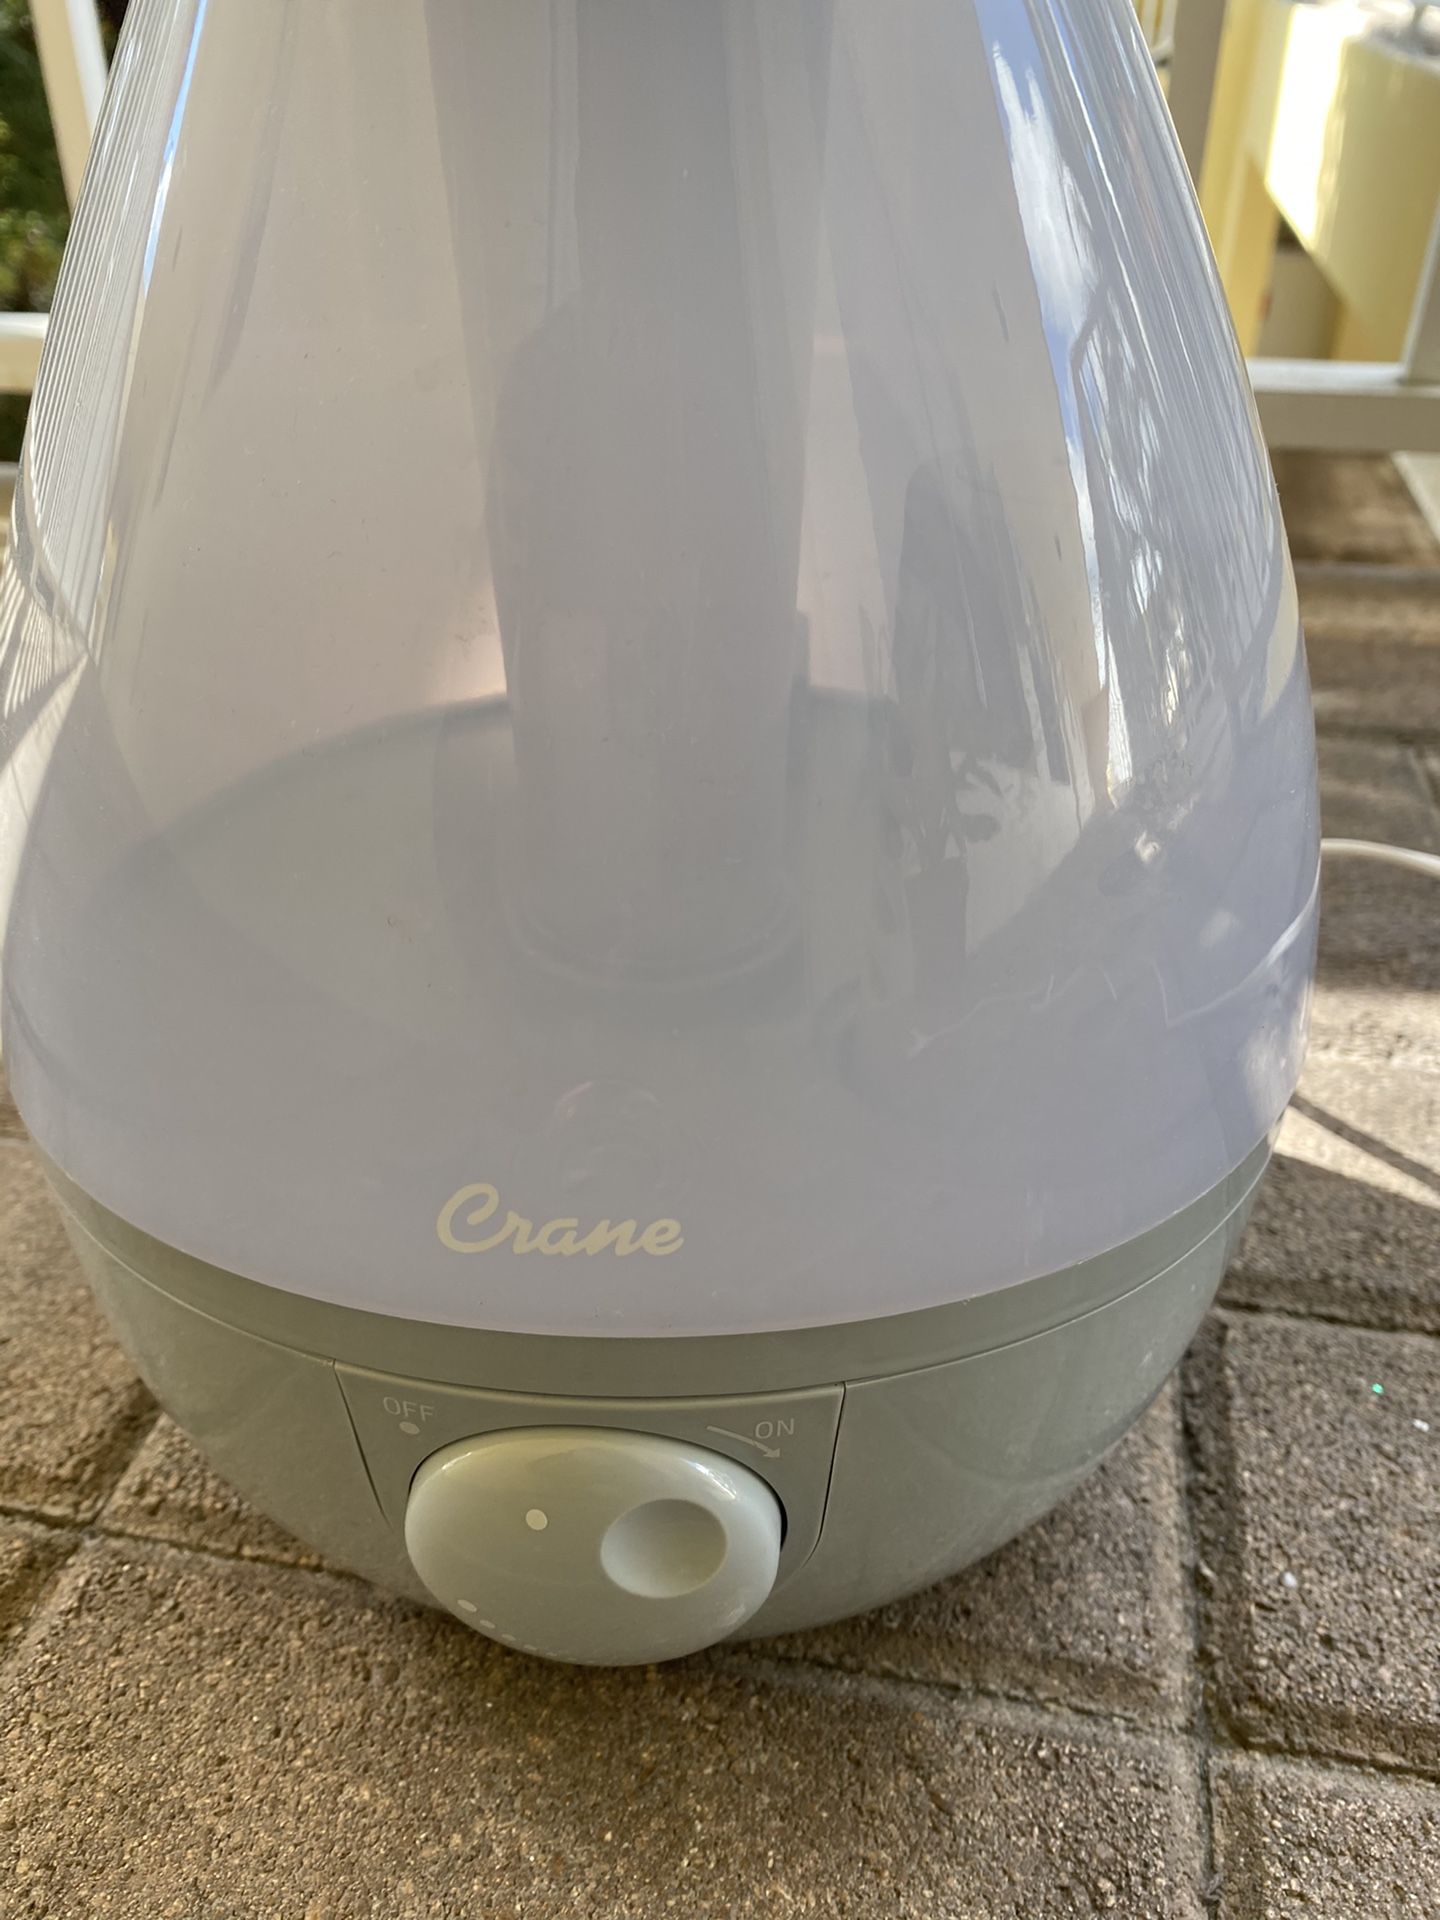 Crane Droplet Ultrasonic Cool Mist Humidifier, Filter Free, 0.5 Gallon with Optional Vapor Pad Slot, 3 Speed Output Settings, Grey